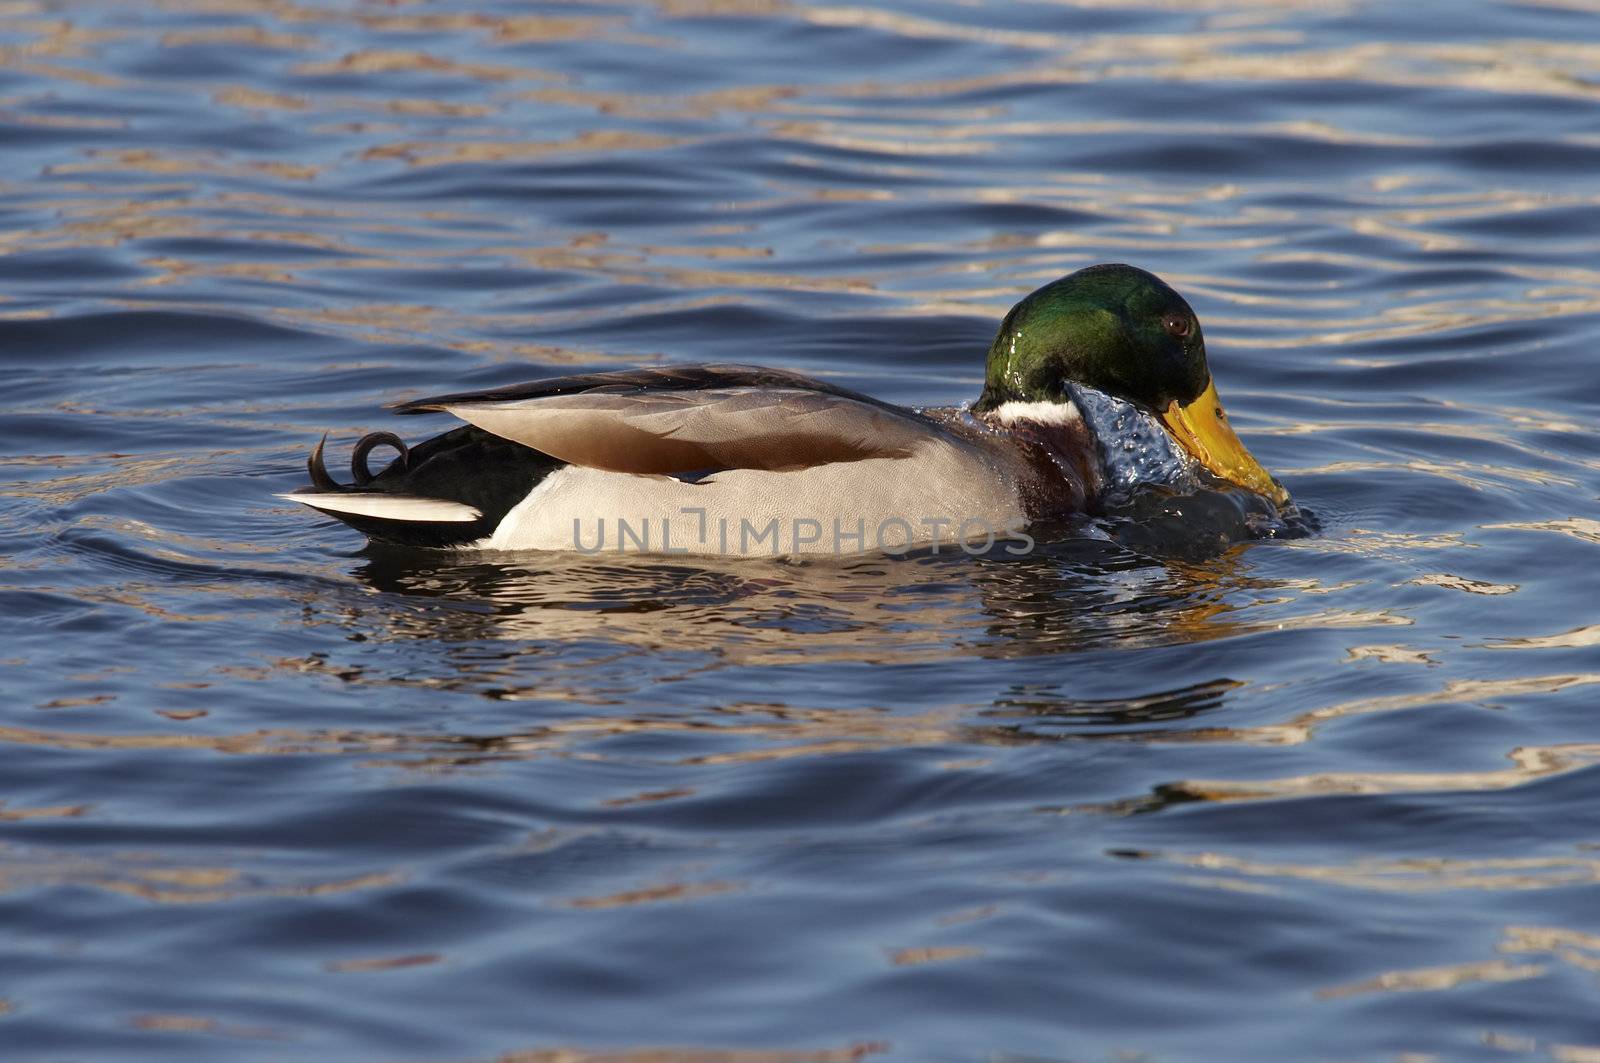 Shot of the wild duck afloating on the water and degustation water